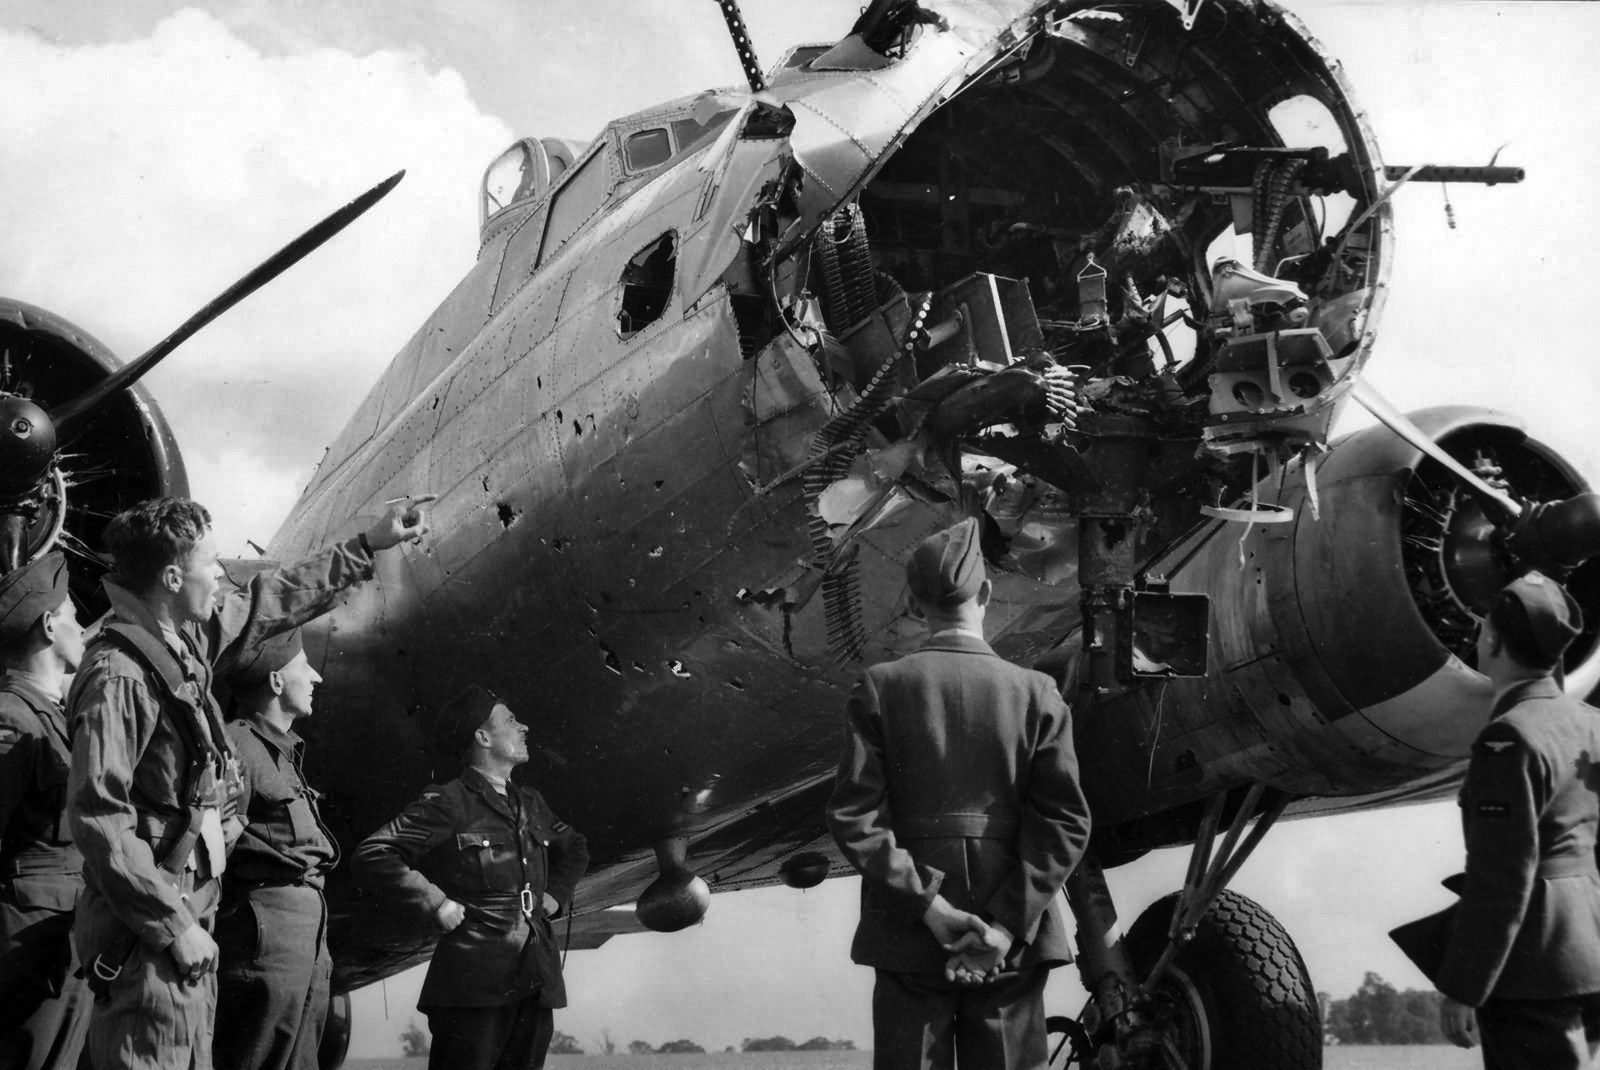 A B-17 from the 379th Bomb Group made it home even with the cockpit shredded. The B-17s natural handling characteristics enabled pilots to fly it back to base even with heavy damage.